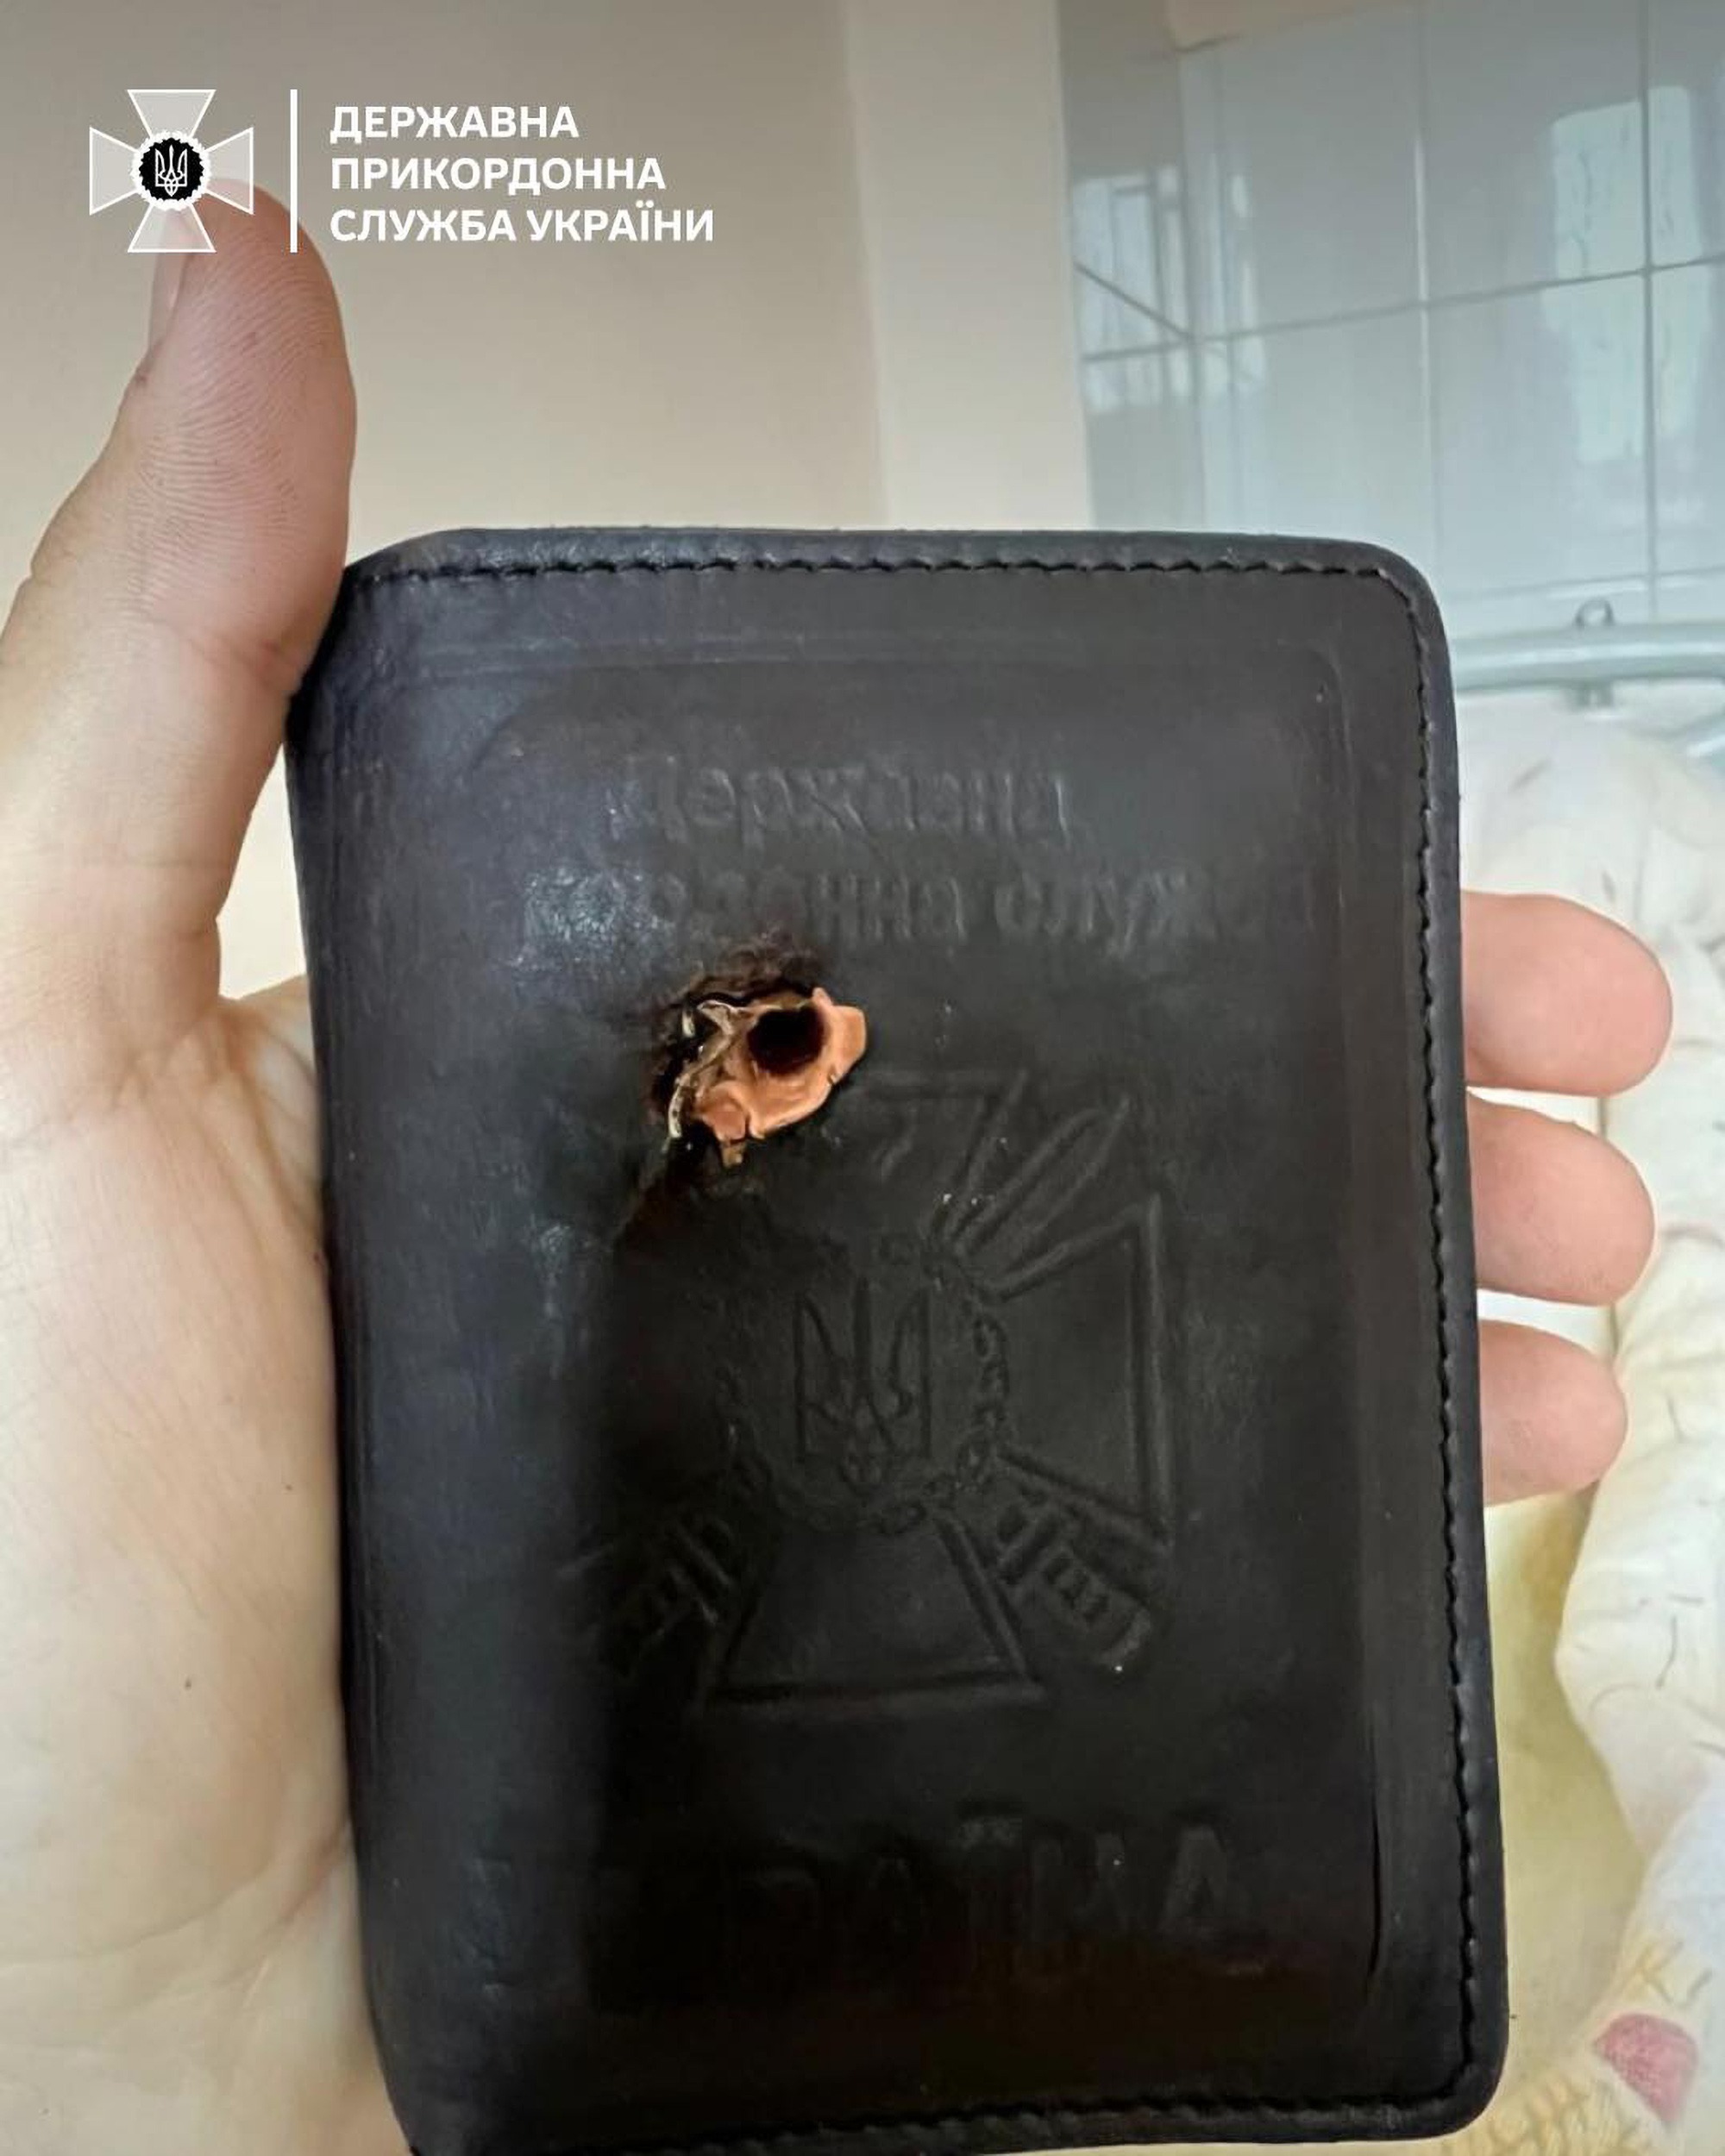 Read more about the article Military ID Card Stopped Russian Bullet From Killing Ukrainian Border Guard